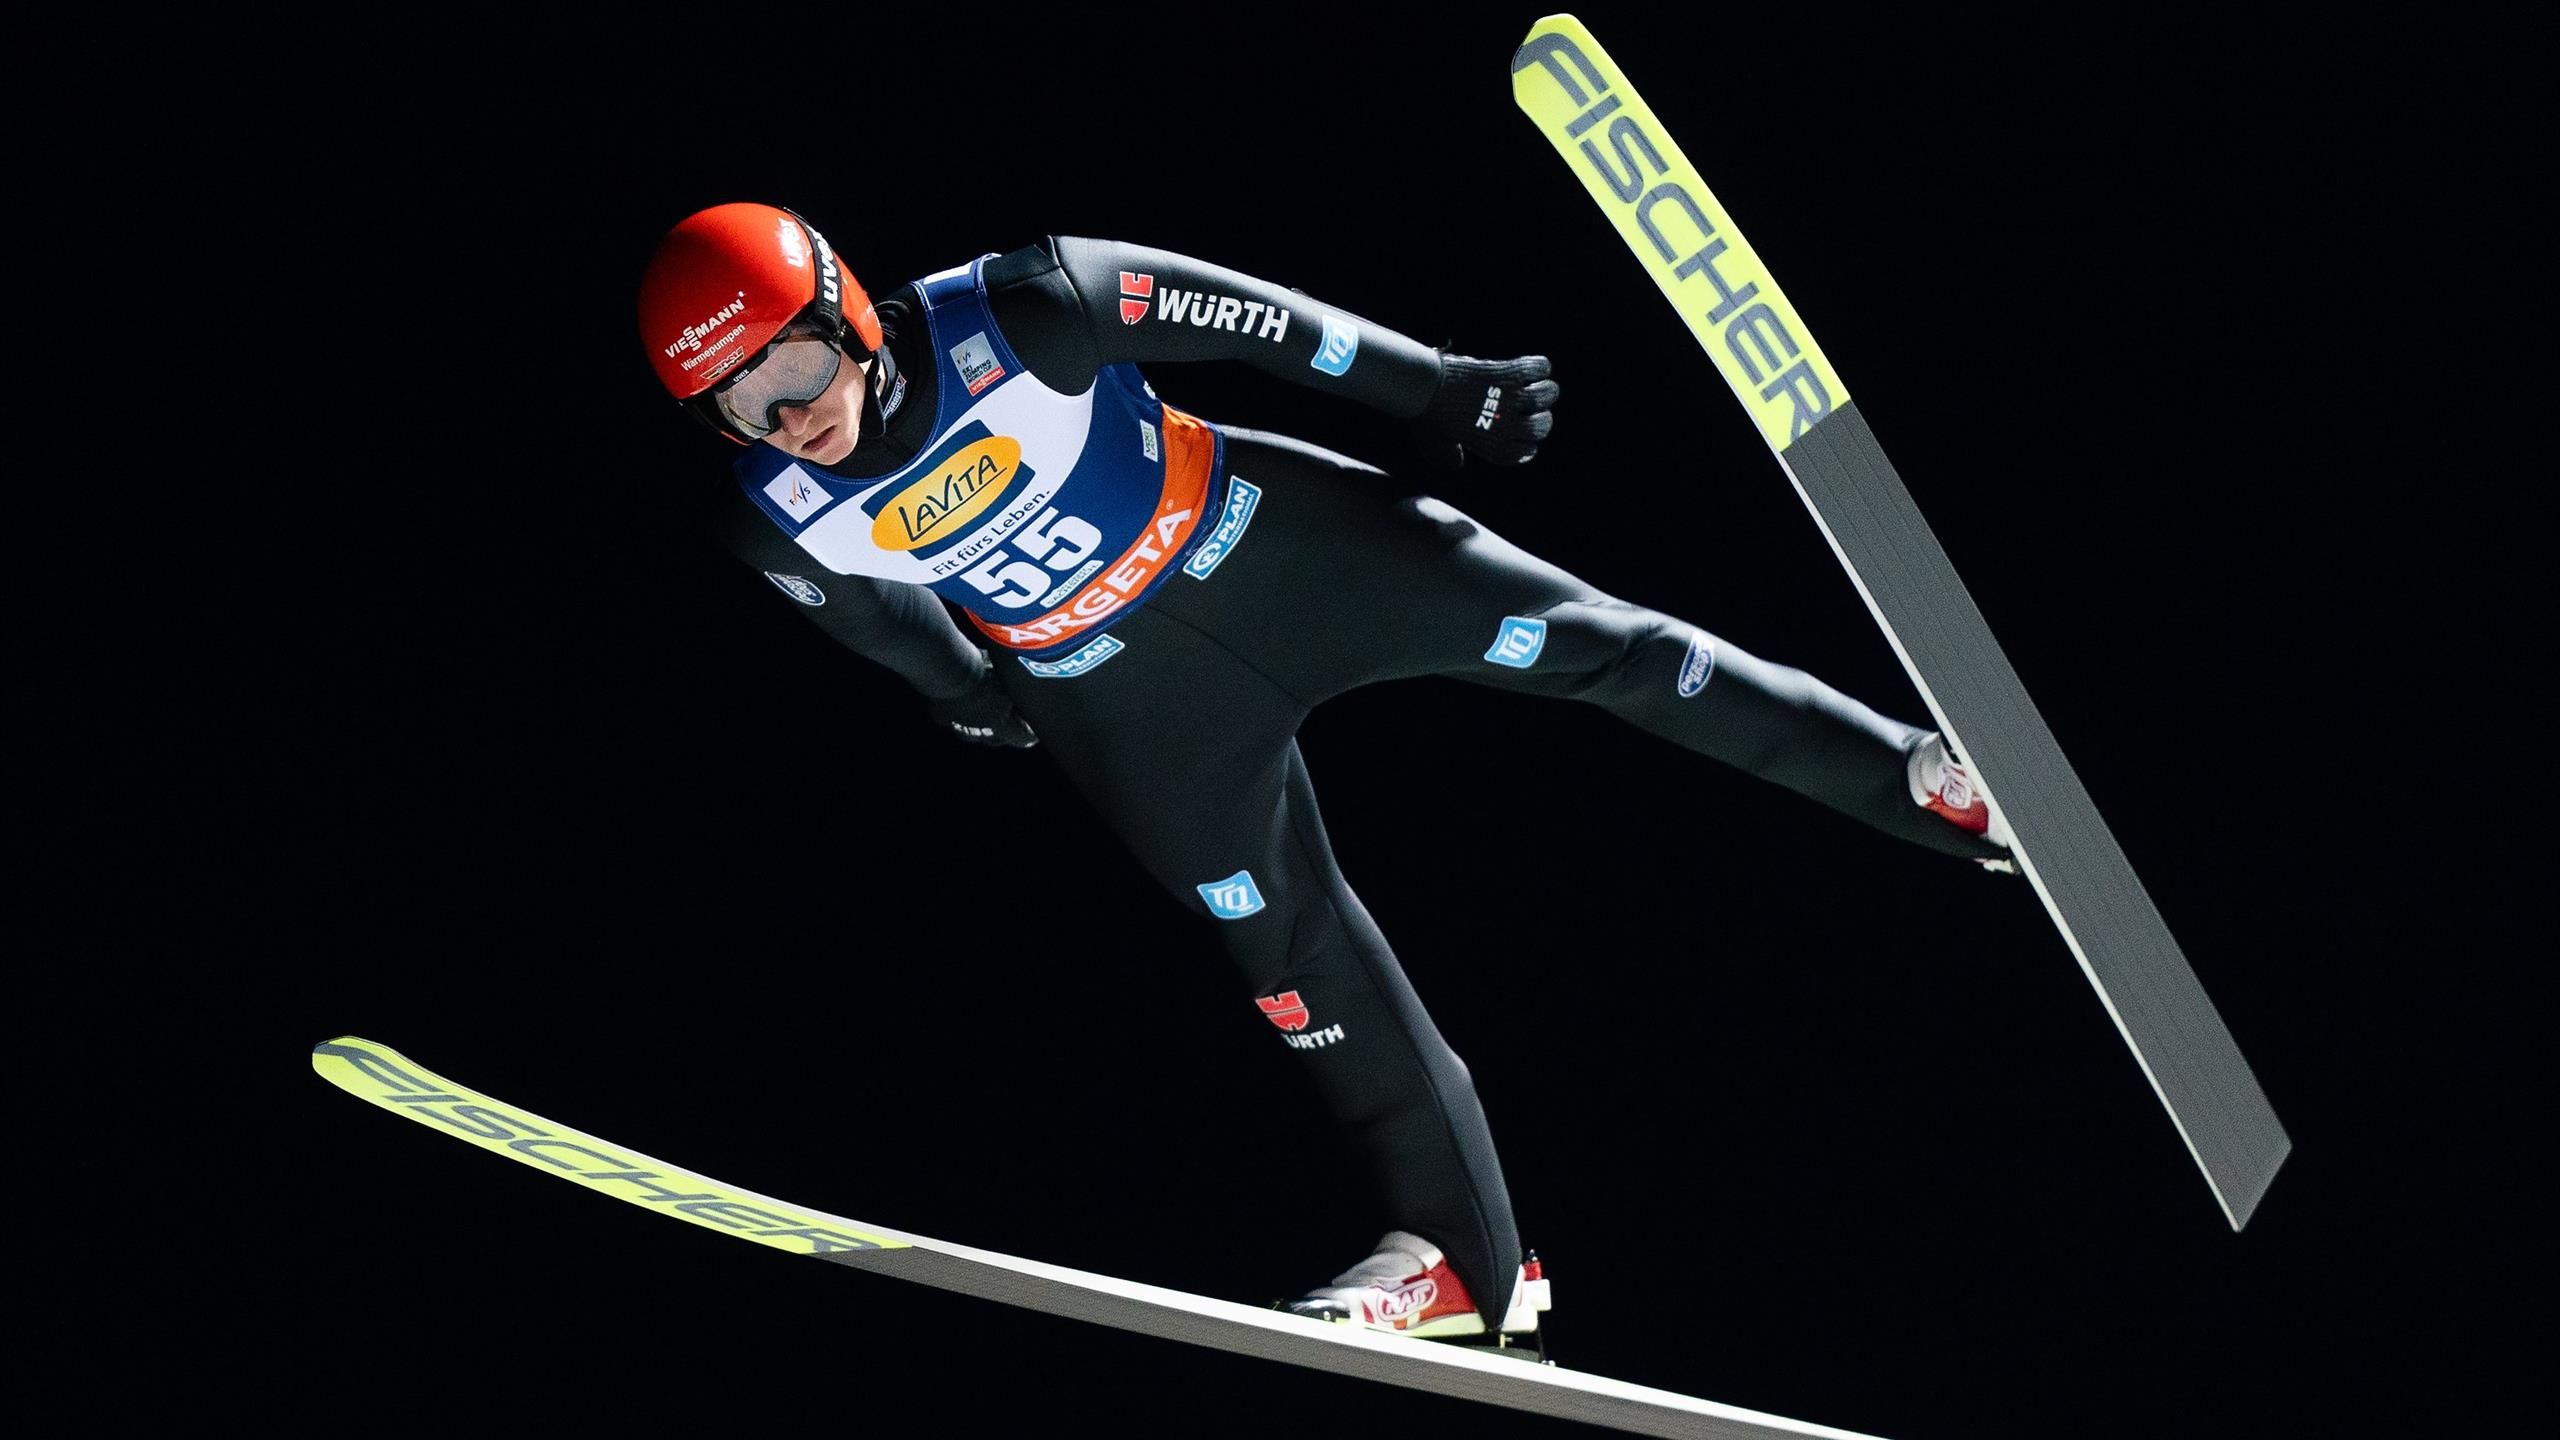 Live broadcast of the Ski Jumping World Cup in Engelberg on TV and live broadcast: Everyone jumps with Wellinger, Geiger and Kraft